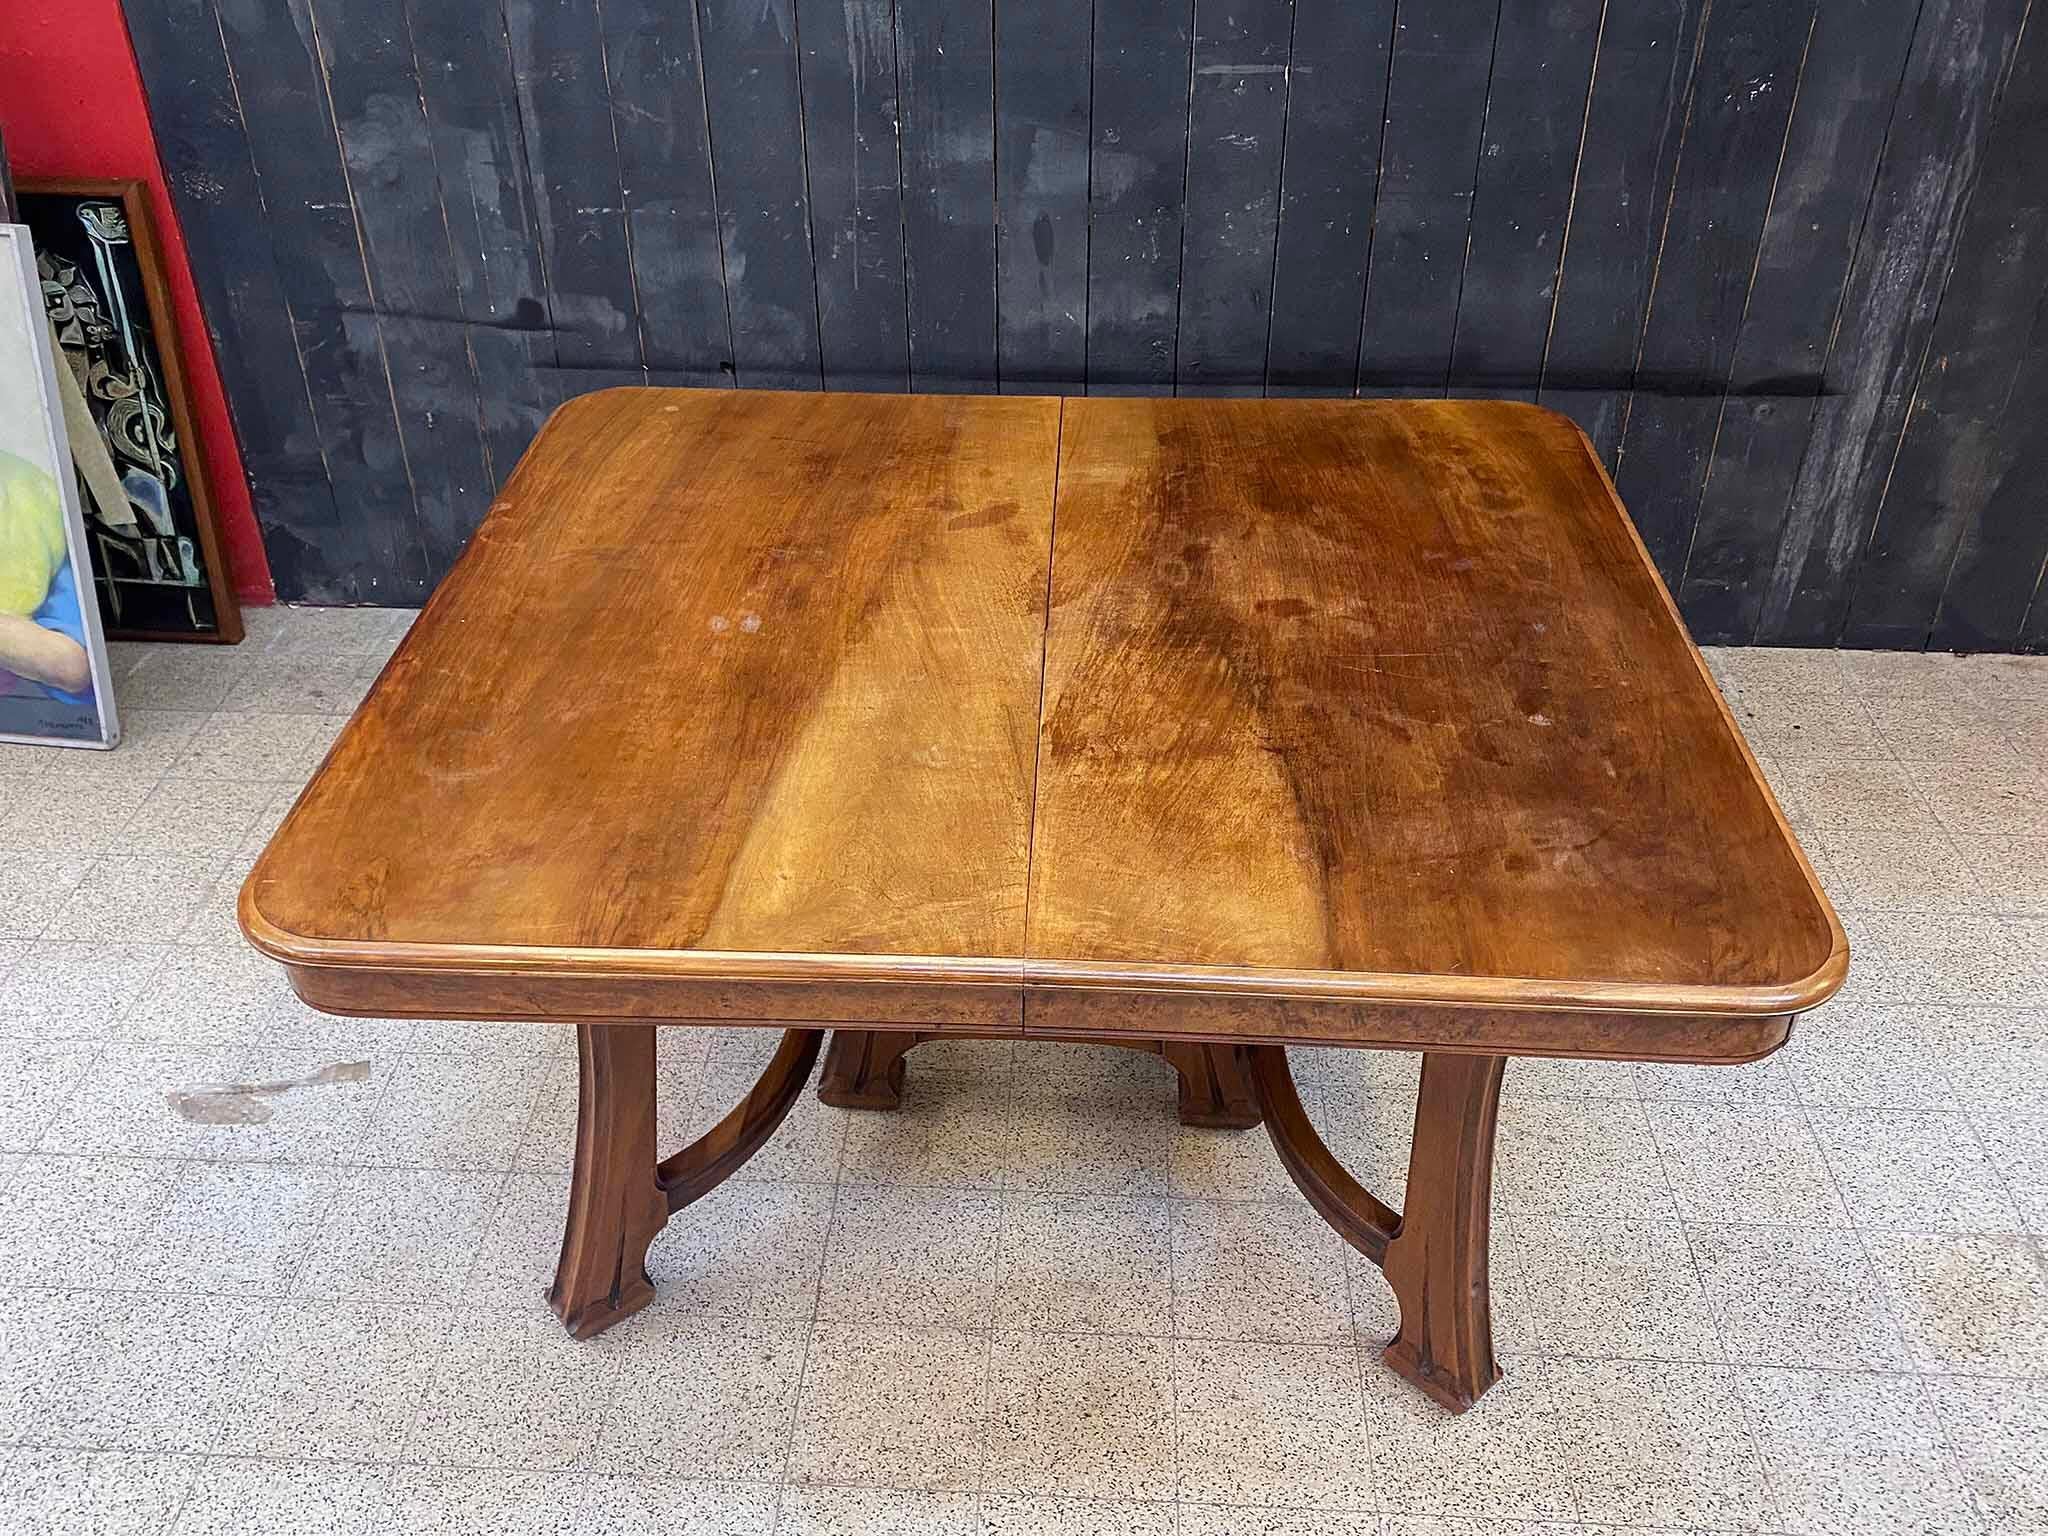 French Attributed to Gauthier-Poinsignon & Cie, Art Nouveau Dining Room Table in Walnut For Sale